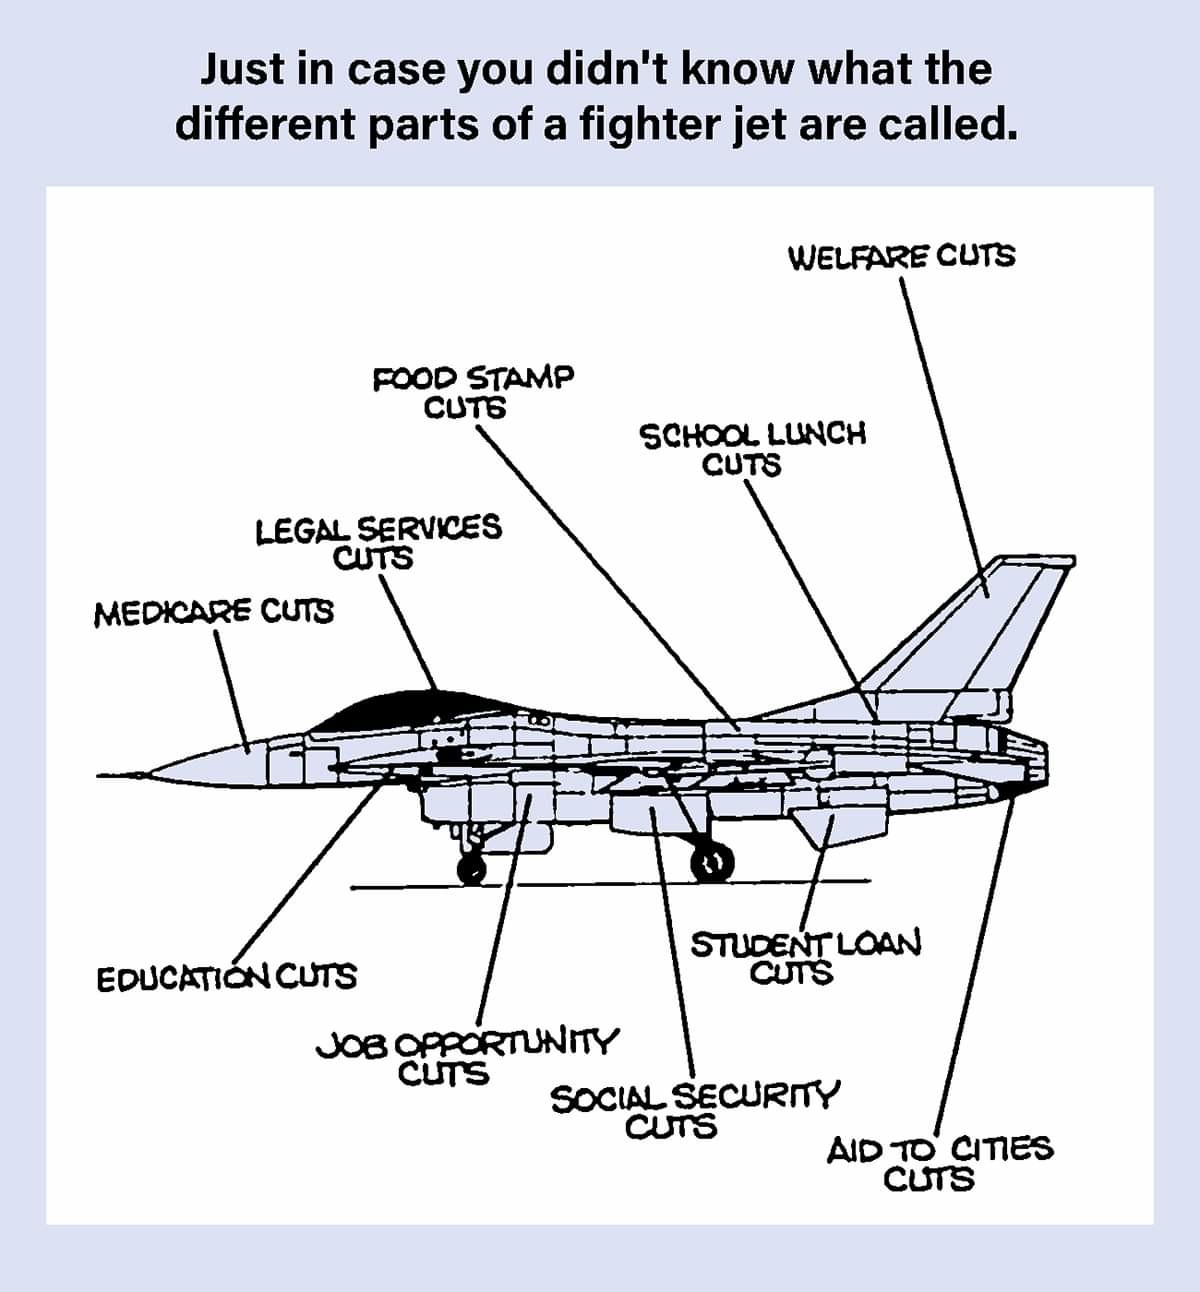 Shows a diagram of a fighter jet. Labeled parts include school lunch cuts, Medicare cuts, welfare cuts, student loan cuts, aid to cities cuts, social security cuts, job opportunity cuts, education cuts, legal services cuts, and food stamp cuts.